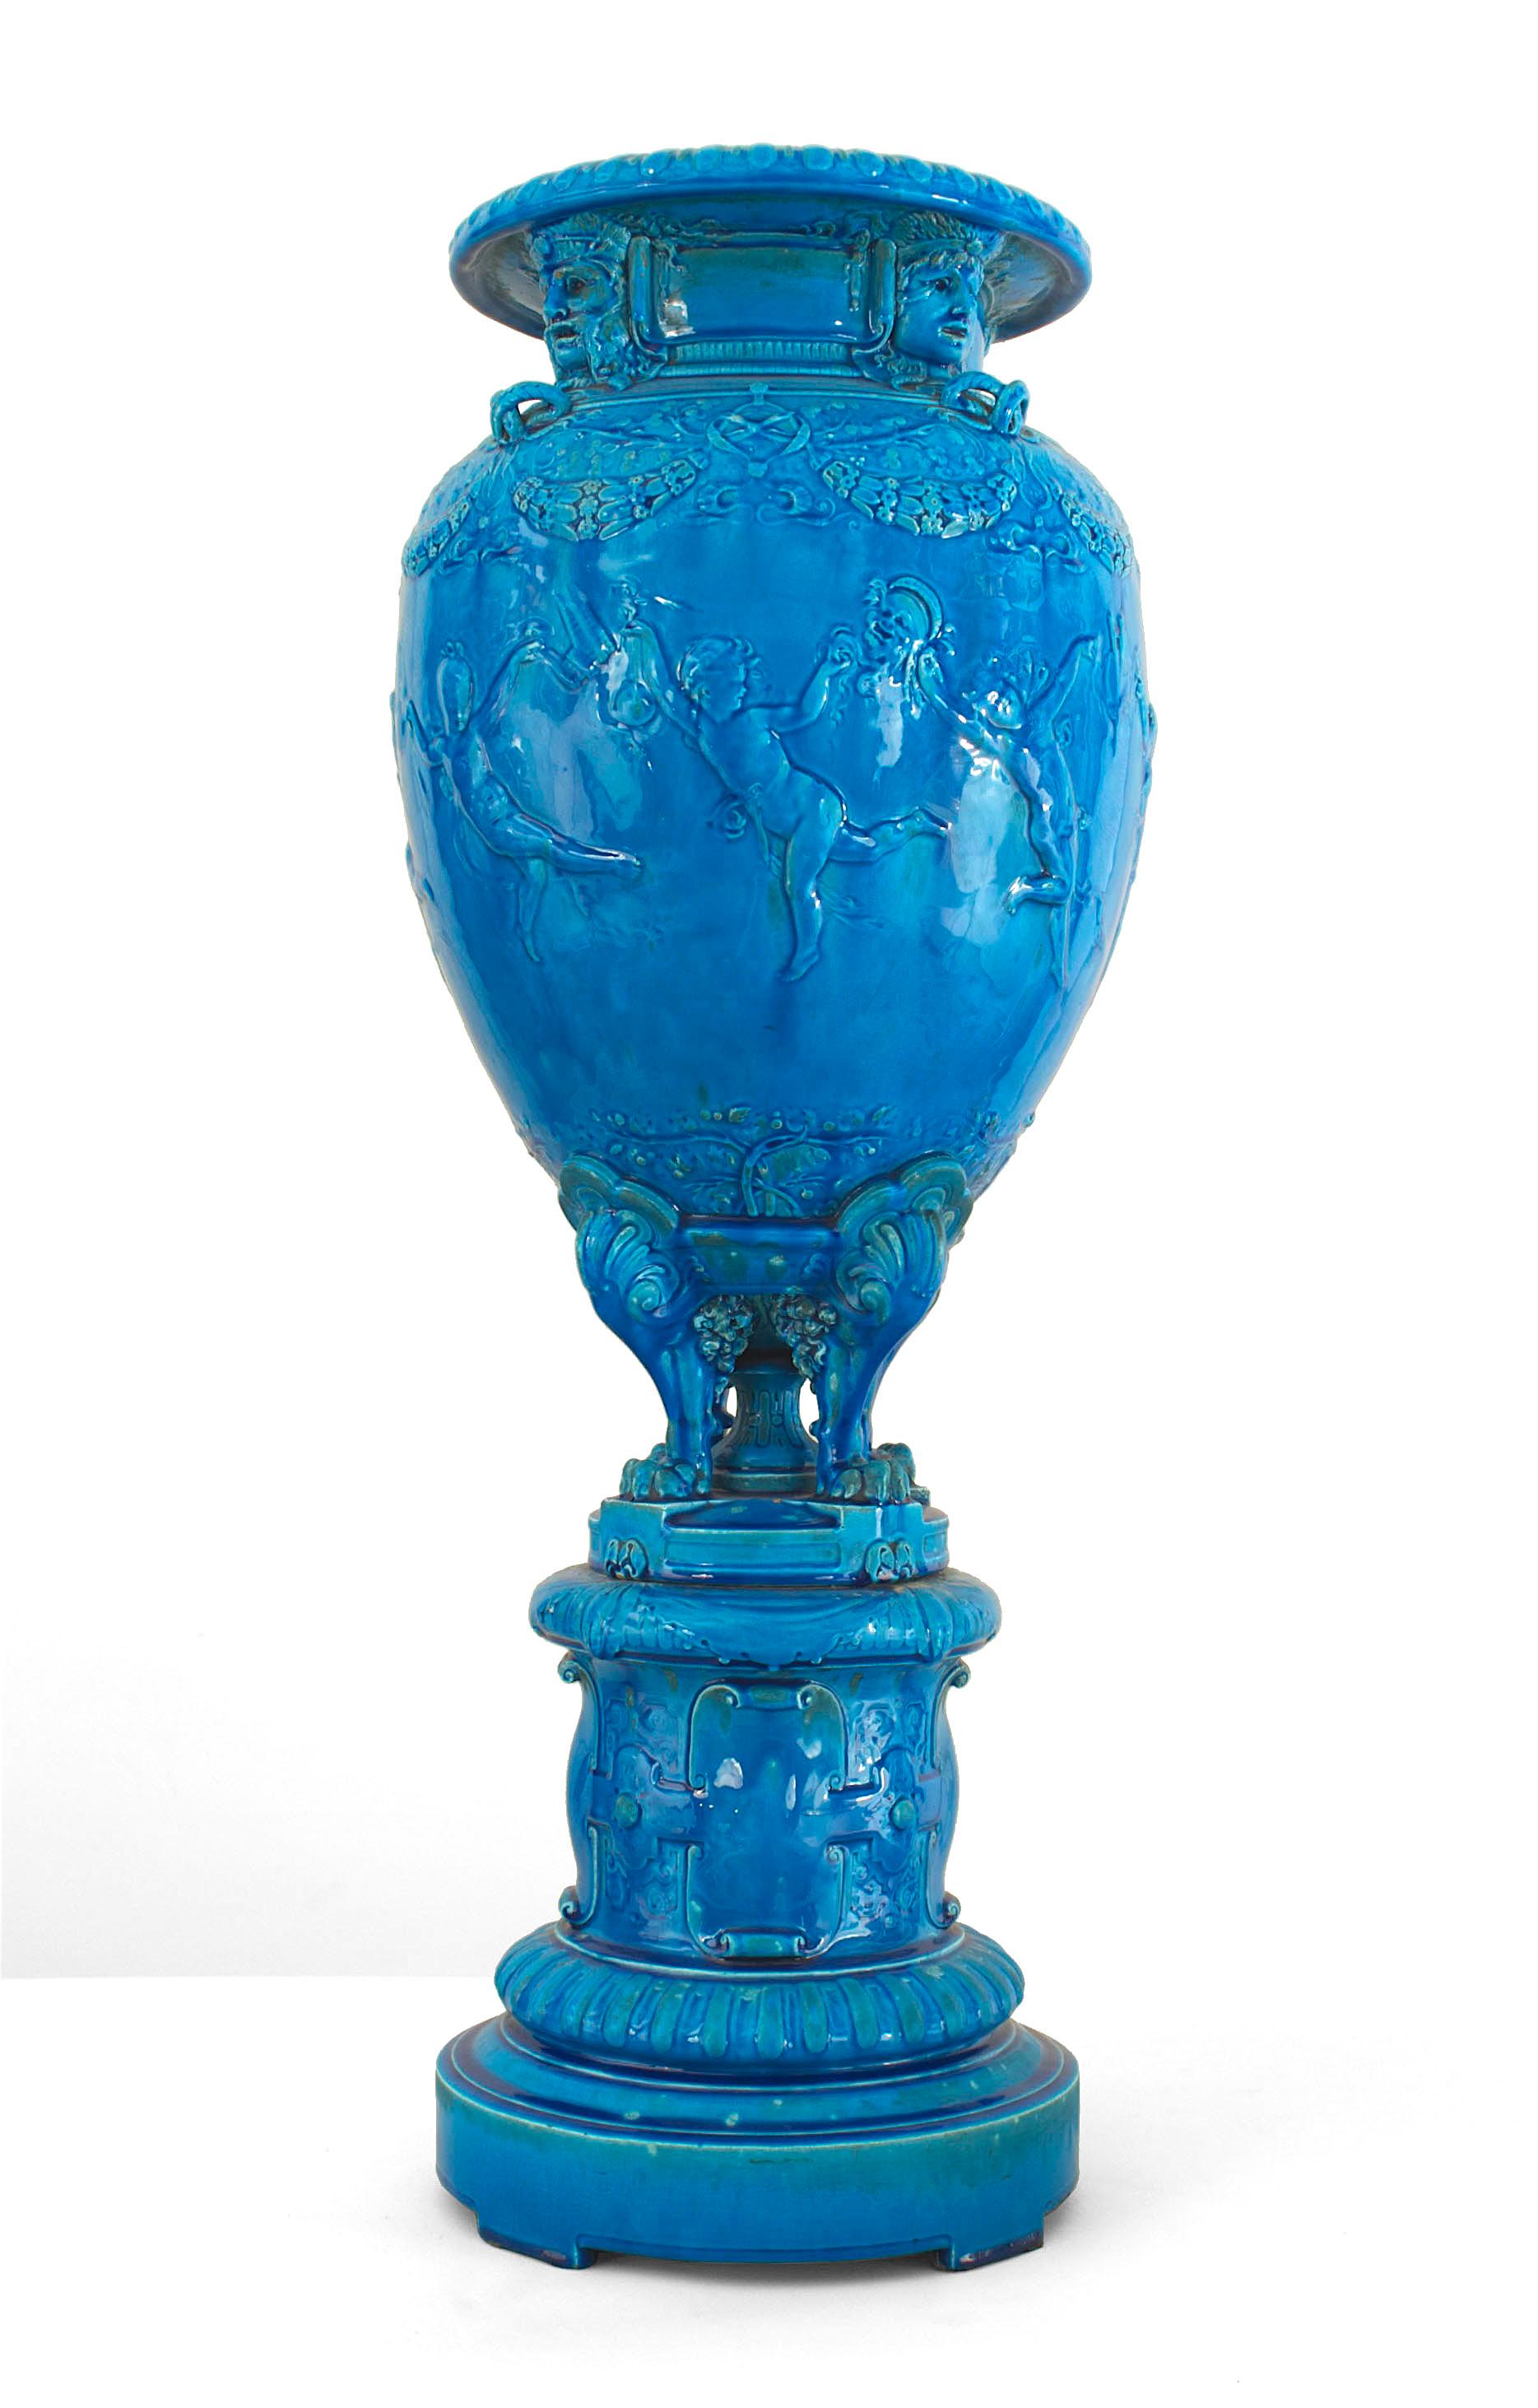 French Victorian monumental turquoise Sevres porcelain vase with cupids in relief on round pedestal base (signed JOSEPH CHERET)
